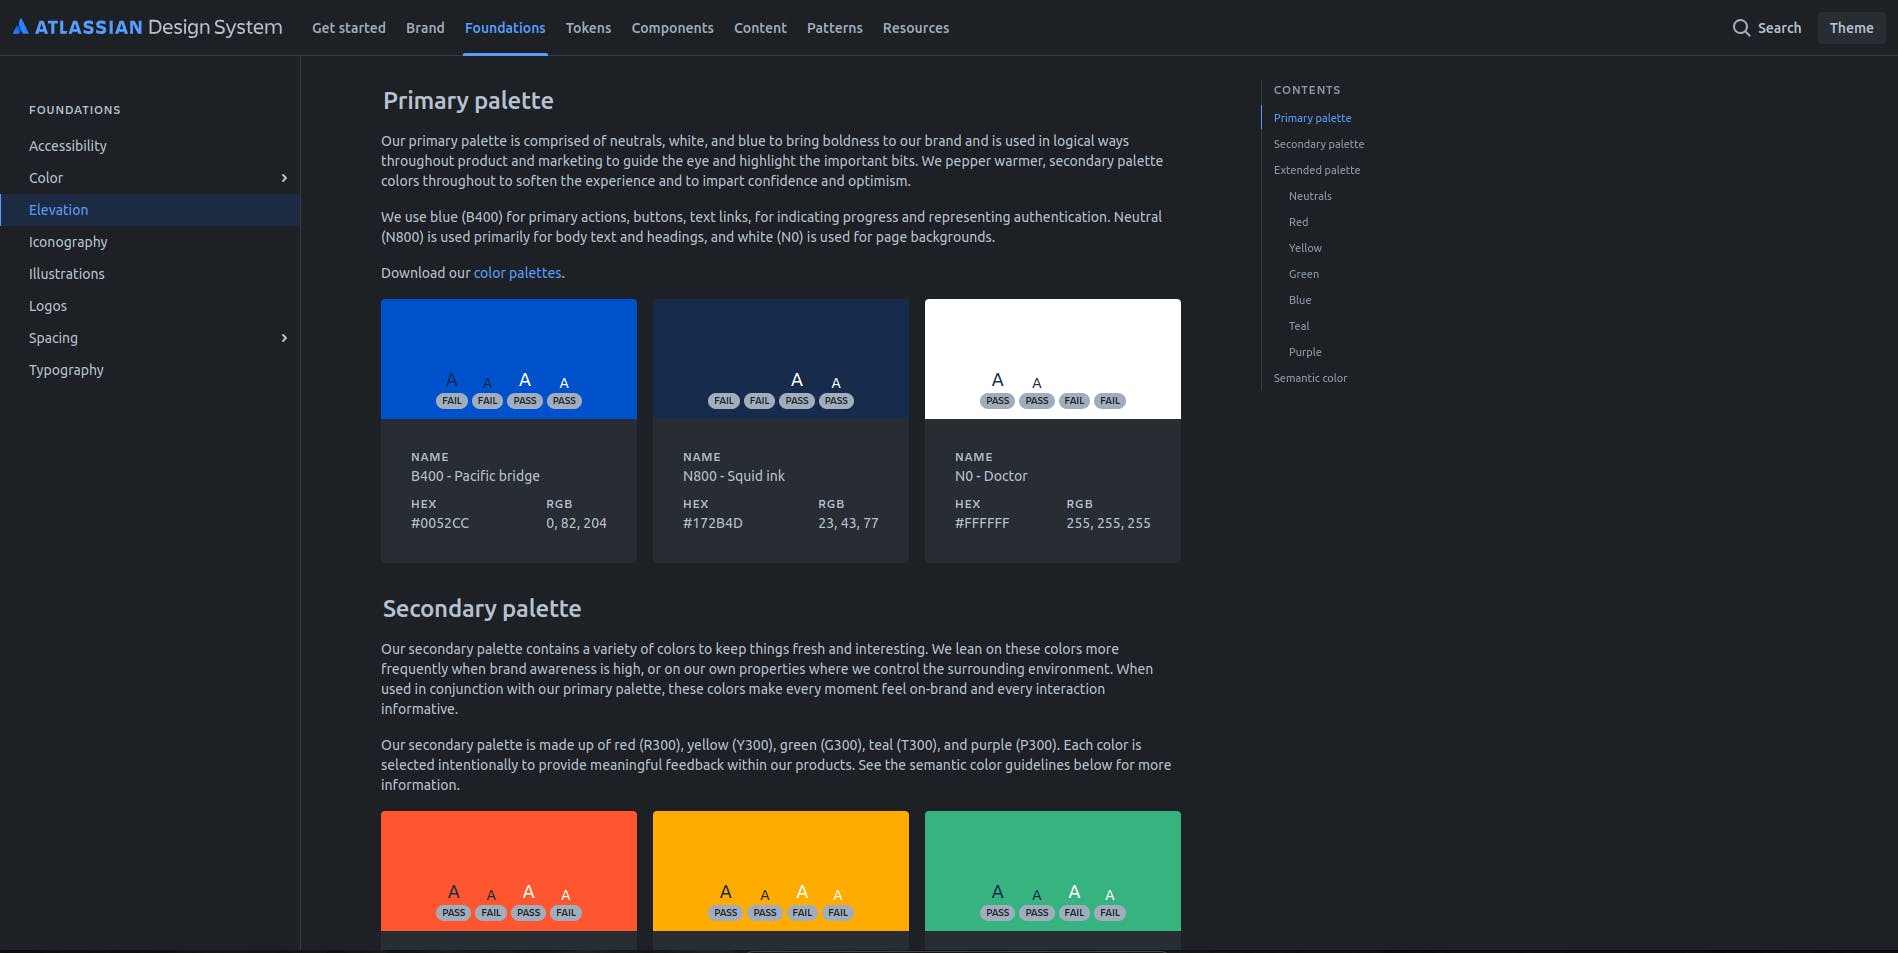 Color palettes from Atlassian Design System